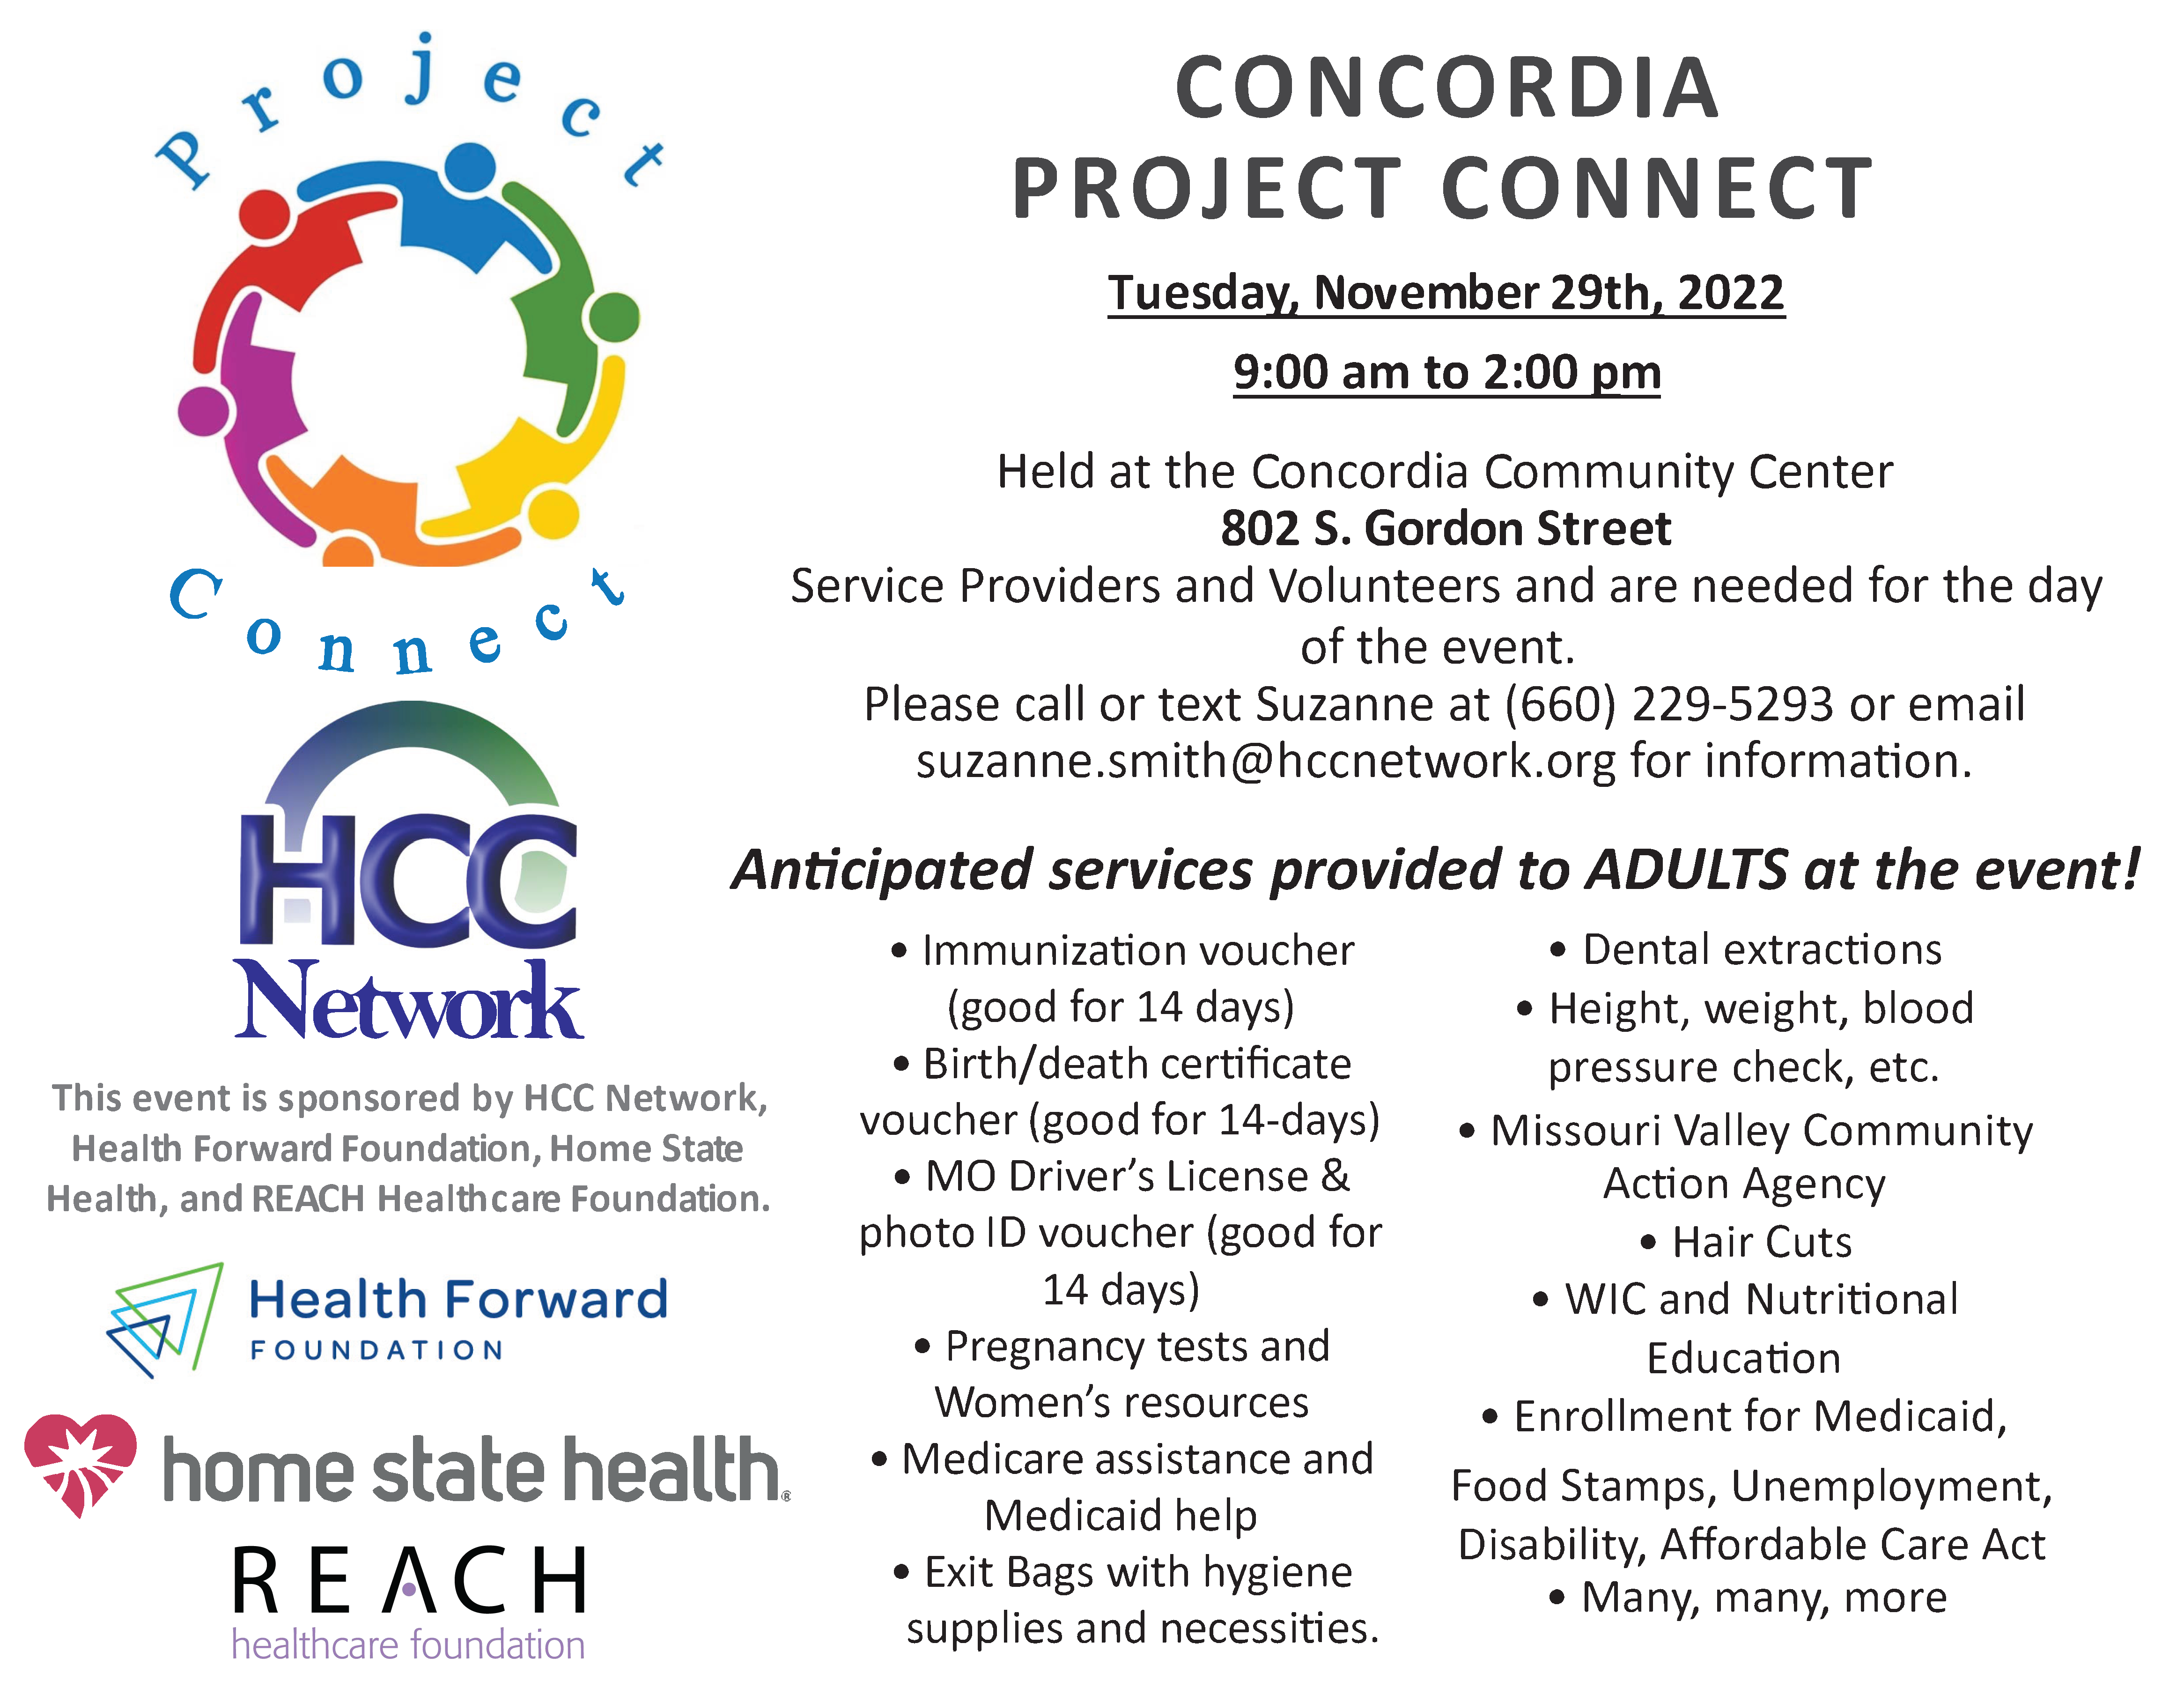 The next Project Connect will be held on Tuesday, November 29 from 9 a.m. – 2 p.m. at the Concordia Community Center, located at 802 S. Gordon St. Concordia, MO, 64020. Project Connect is a one-day public health outreach event designed to help underserved and uninsured adults find needed community resources. All services offered are free. To help spread the word, download an event flier.   Vendor organizations will help raise awareness of available community resources by providing information and free services while also building connections with members of the community. Volunteers will guide attendees around the event and inform them about the community resources and services available.   Hair cut providers as well as volunteers are needed for the Concordia Project Connect on Tuesday, November 29. To learn more and get involved, contact Suzanne Smith at 660.229.5293 and download the Service Provider Form.   Services and resources available at Project Connect events include: Dental extractions in our mobile unit (first come, first serve). Haircuts. Height, weight, blood pressure check, etc. Enrollment assistance for Medicaid and Medicare. WIC and nutritional information and education. Pregnancy tests and women’s resources. Exit bags with hygiene supplies and necessities. Immunizations voucher (good for 14 days). Birth/death certificate voucher (good for 14 days). MO driver’s license and photo ID voucher (good for 14 days). Many other resources!